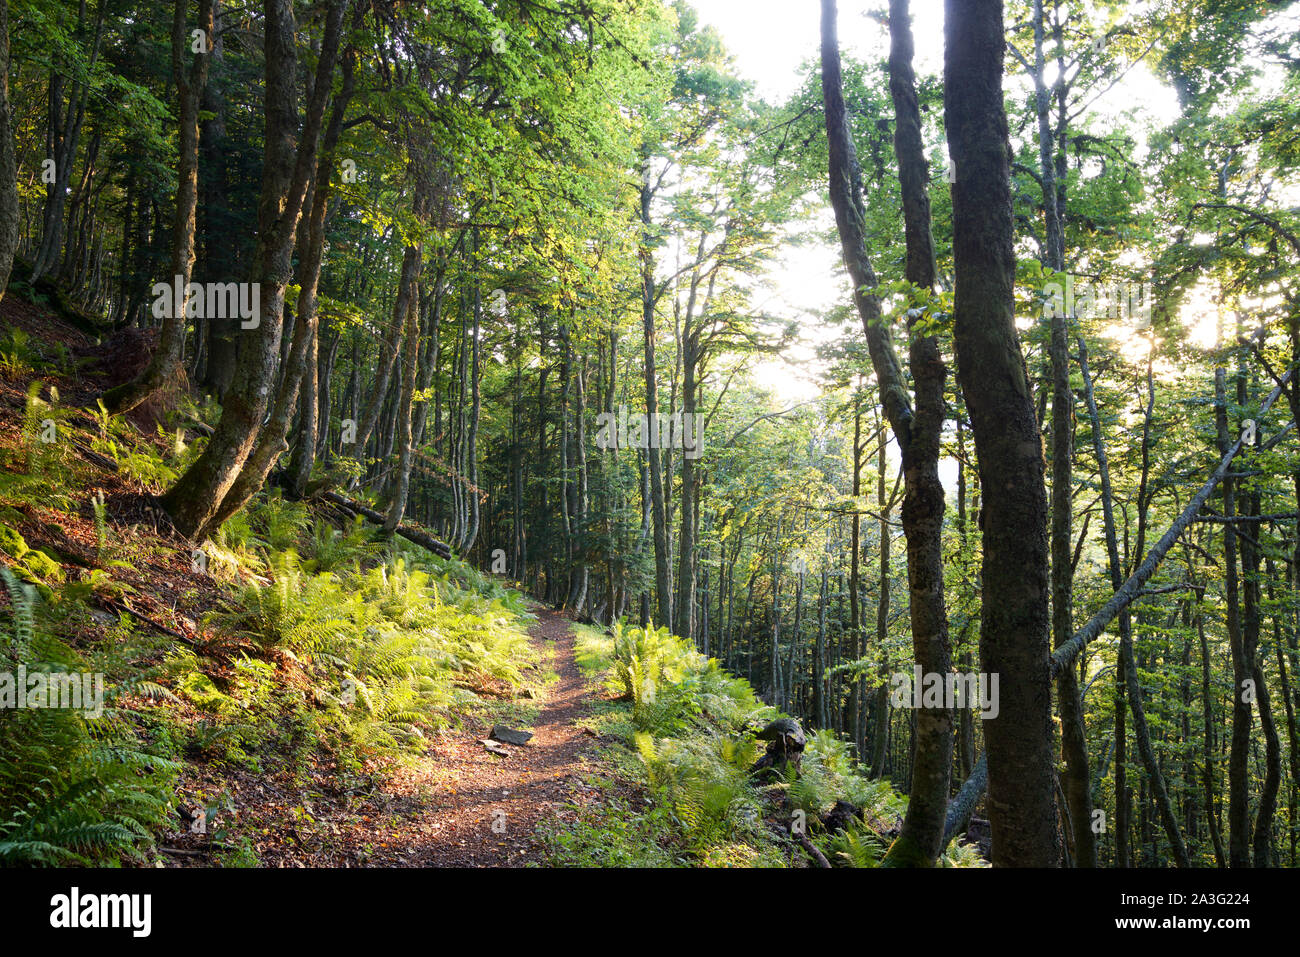 Hiking trail through a forest in the Pyrenees. Stock Photo